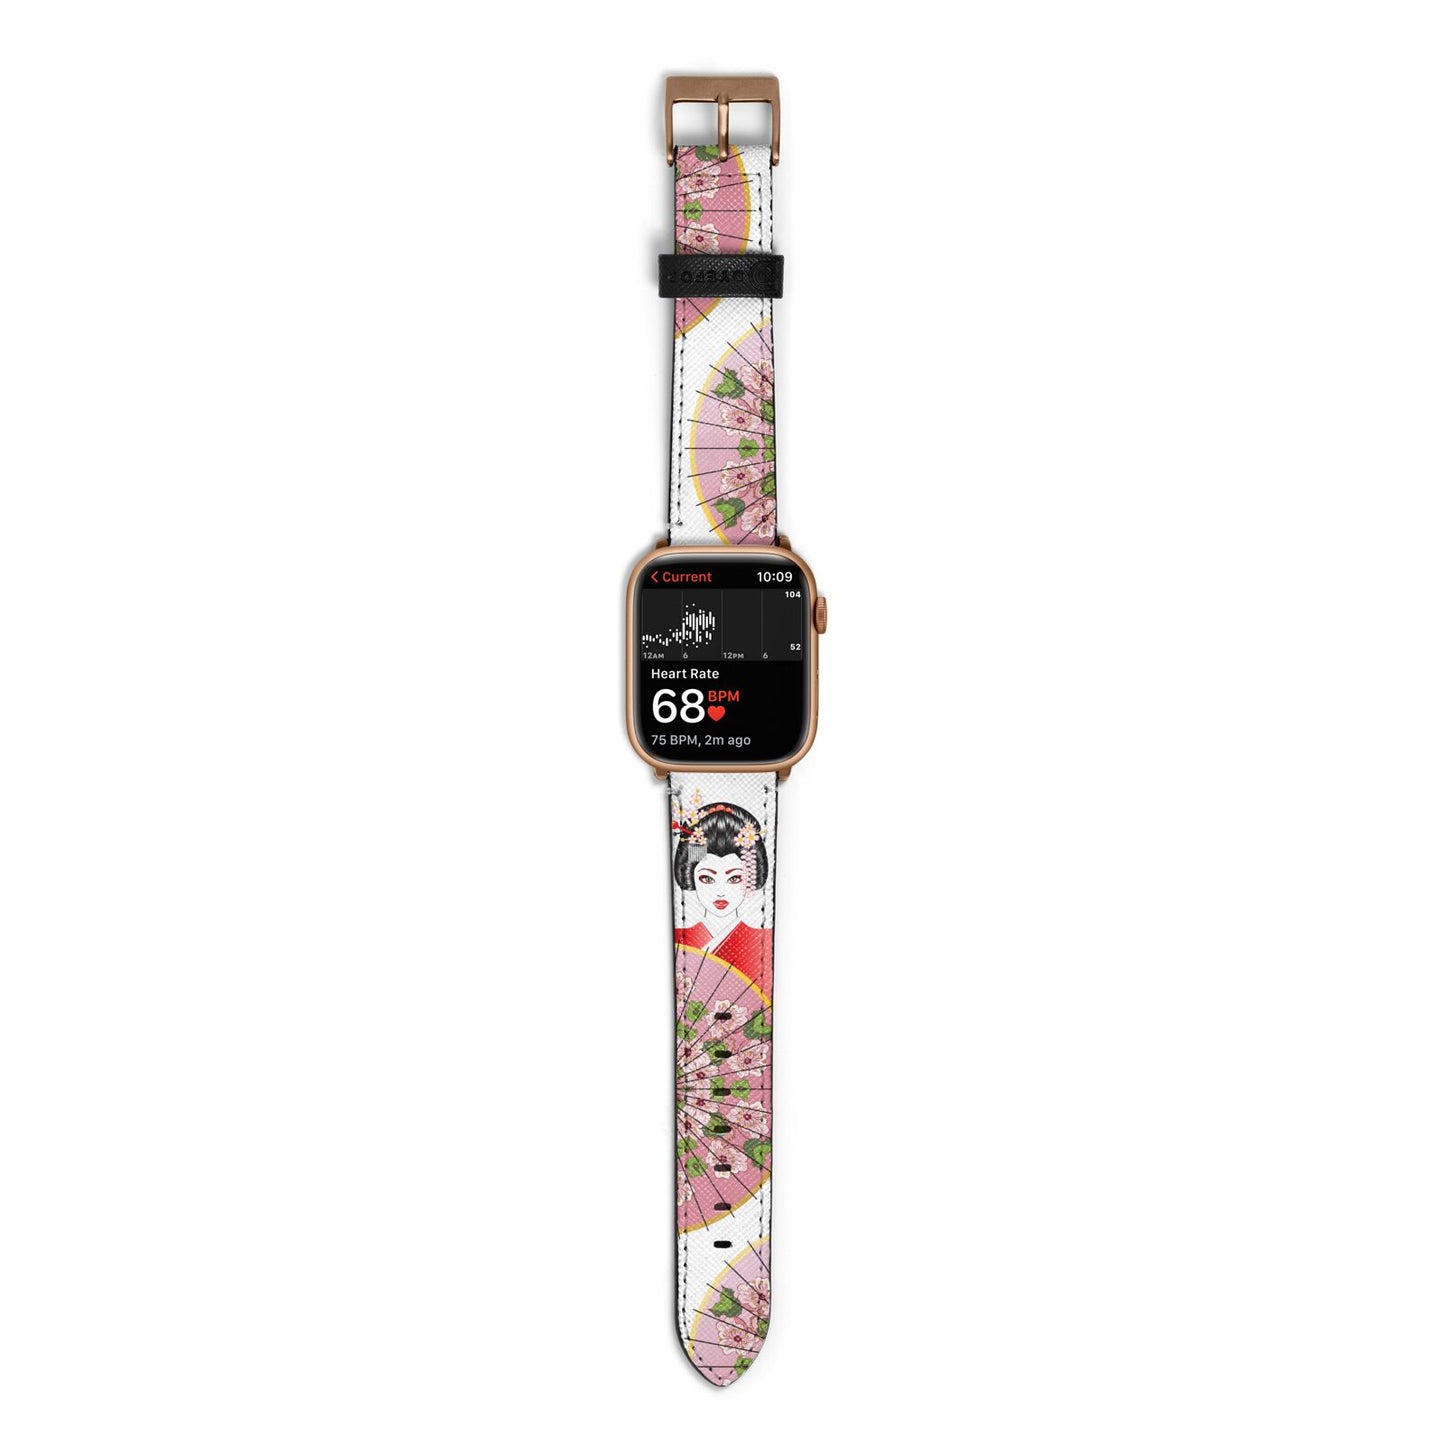 Geisha Girl Apple Watch Strap Size 38mm with Gold Hardware